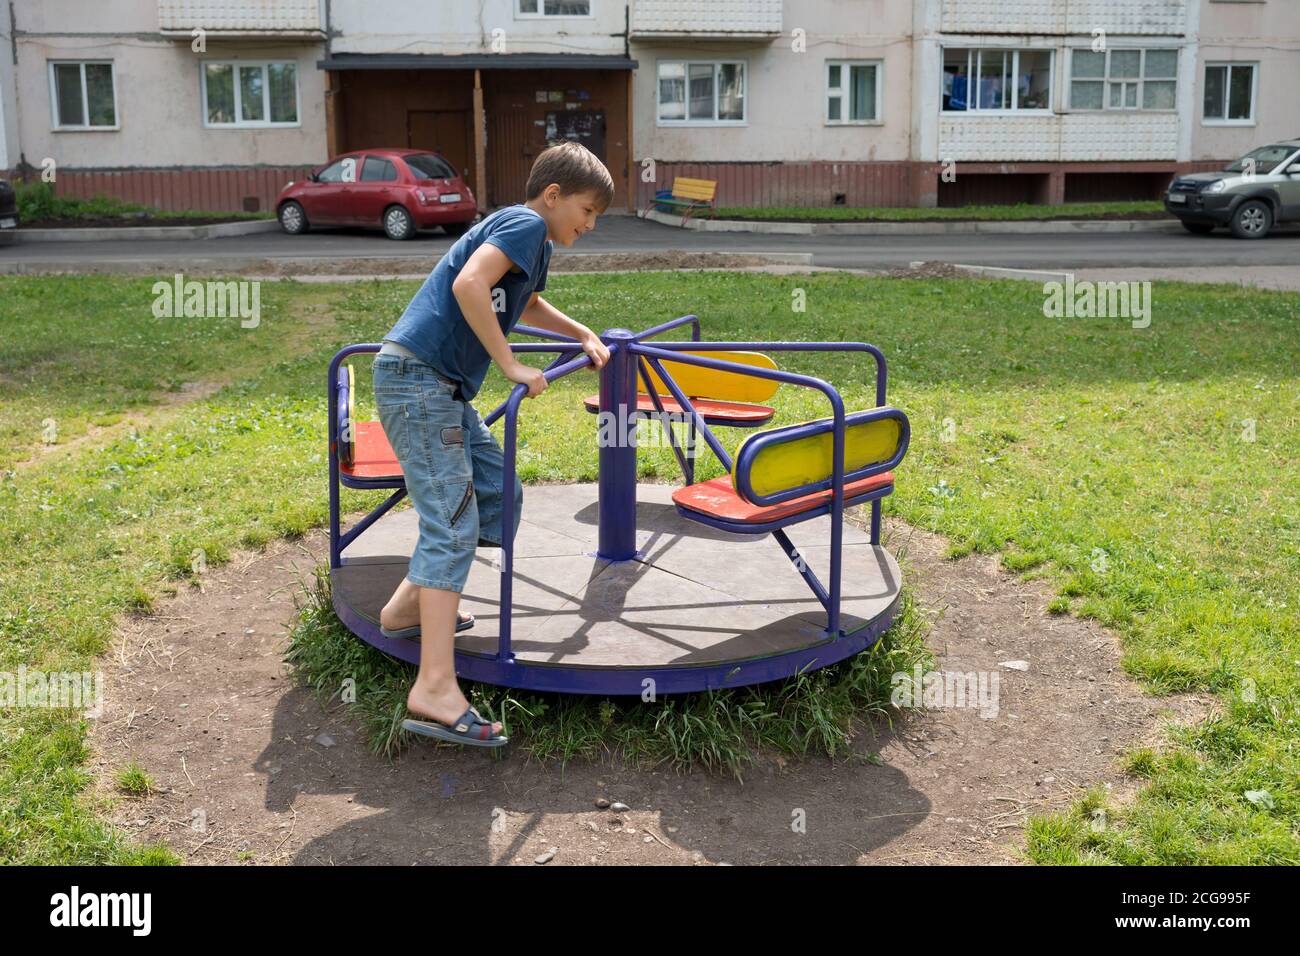 The boy is spinning on a swing in the courtyard of a residential building. Stock Photo